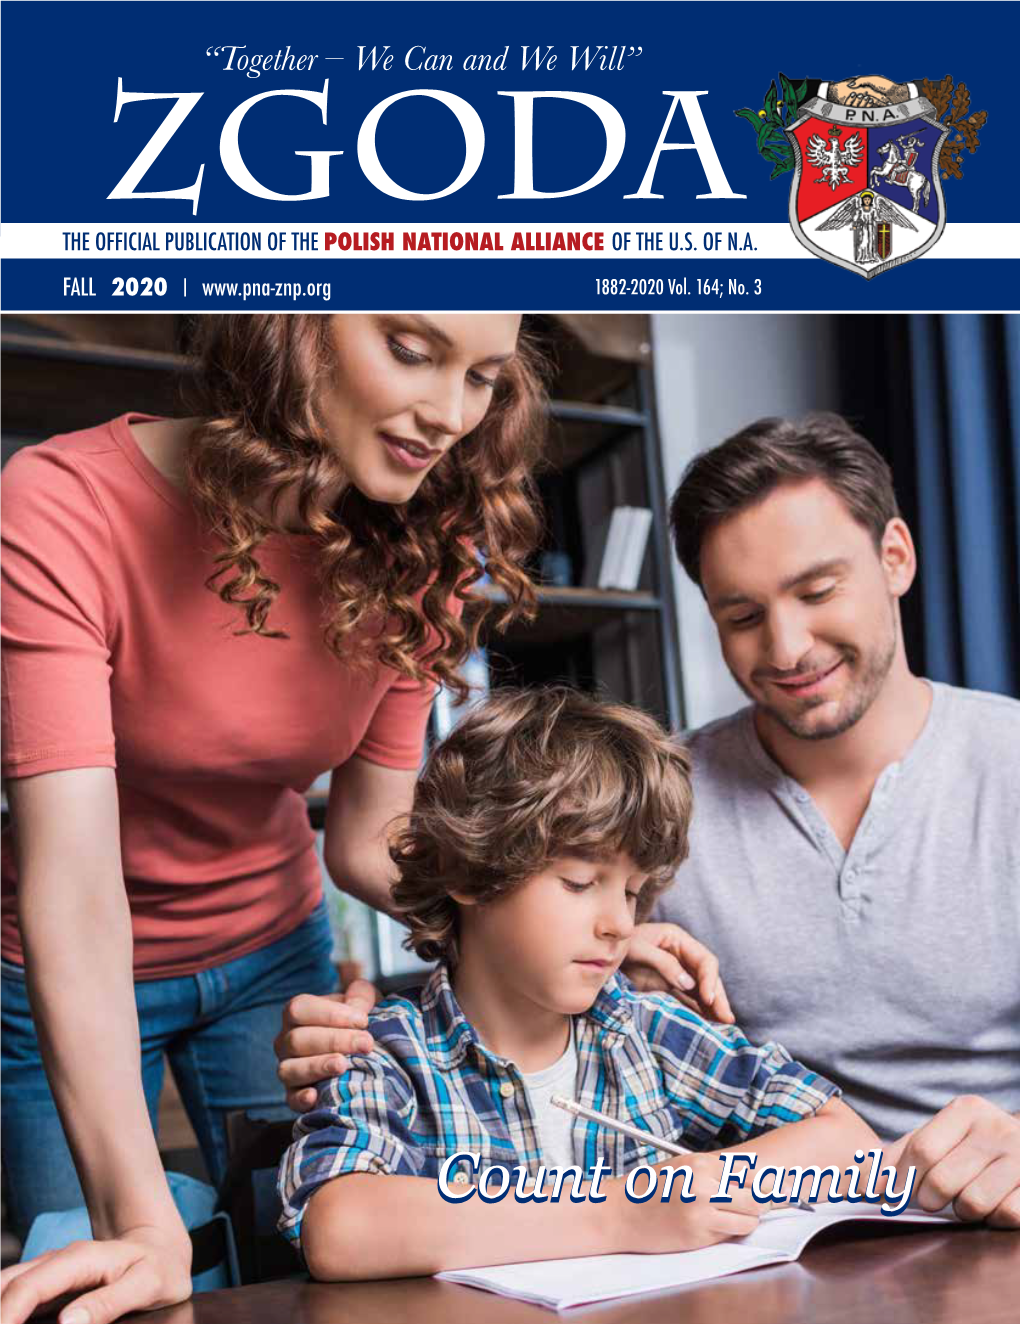 Zgoda the Official Publication of the of the U.S